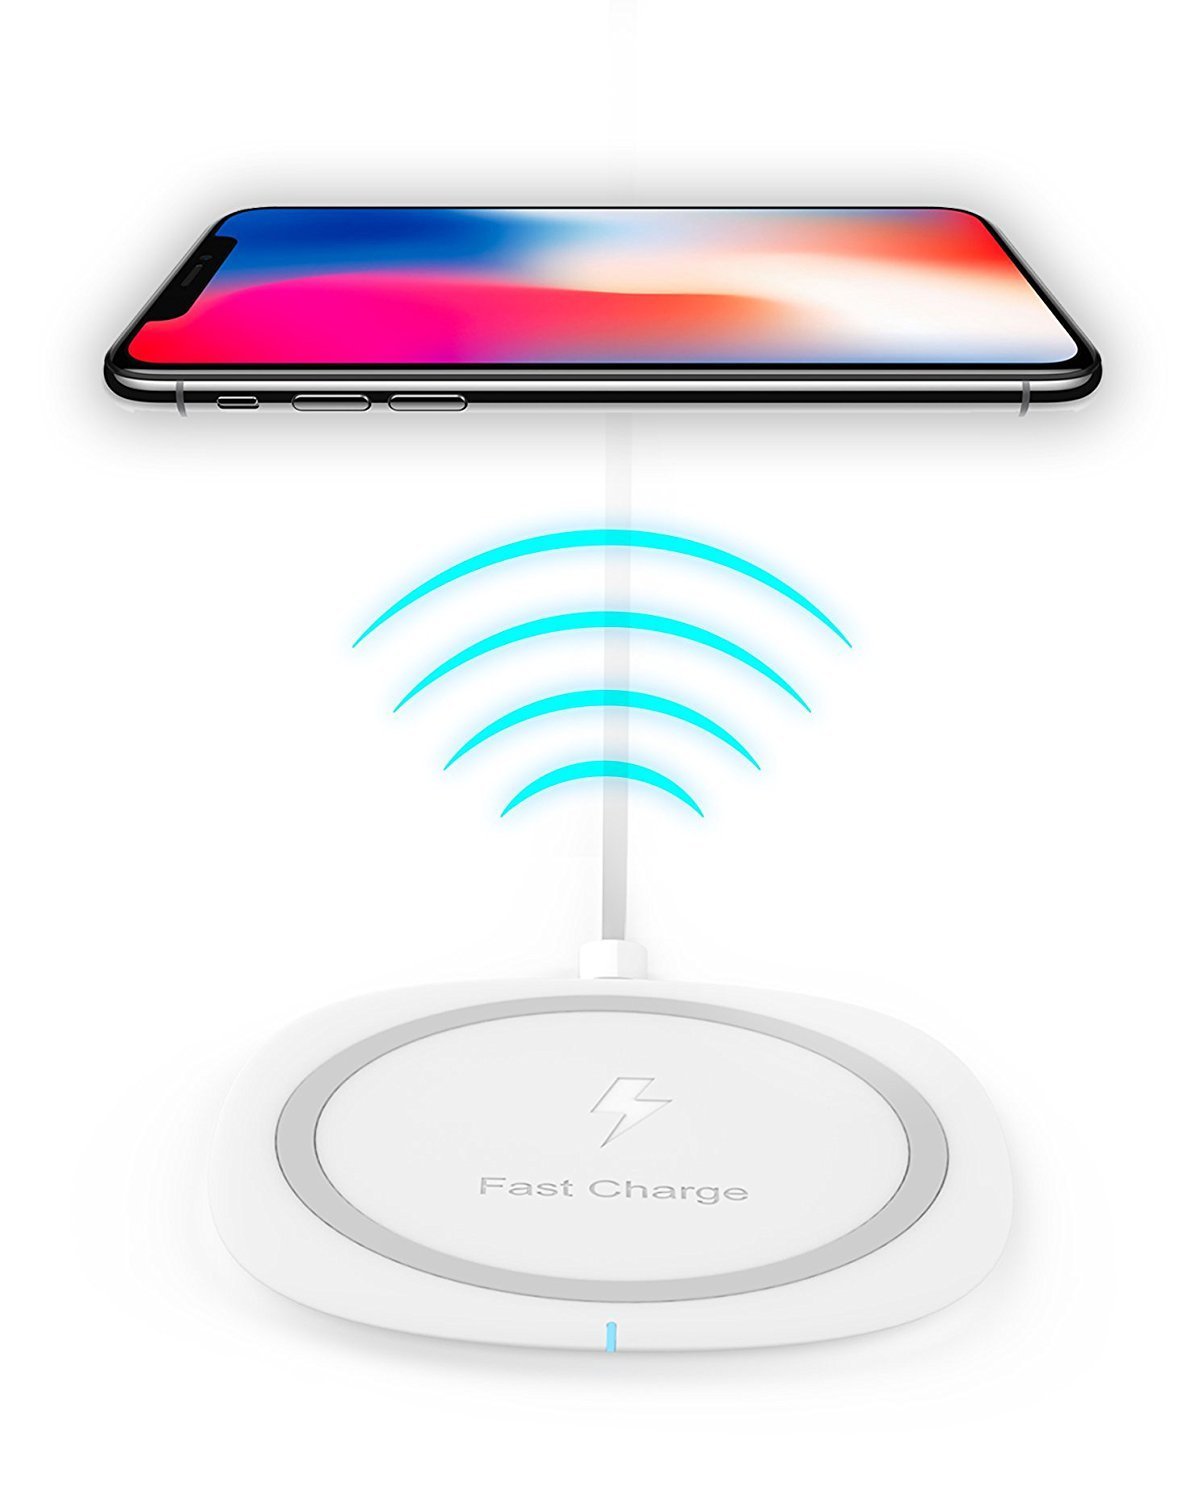 Fast Wireless Charger For Microsoft Lumia 950 XL Wireless Quick Charger Fast Charge 10W for iPhone X, iPhone 8, iPhone 8 Plus,Samsung Note 8, S6 Edge +, S7, S7 Edge, S8 and S8 Plus, etc. by Ixir - image 1 of 8